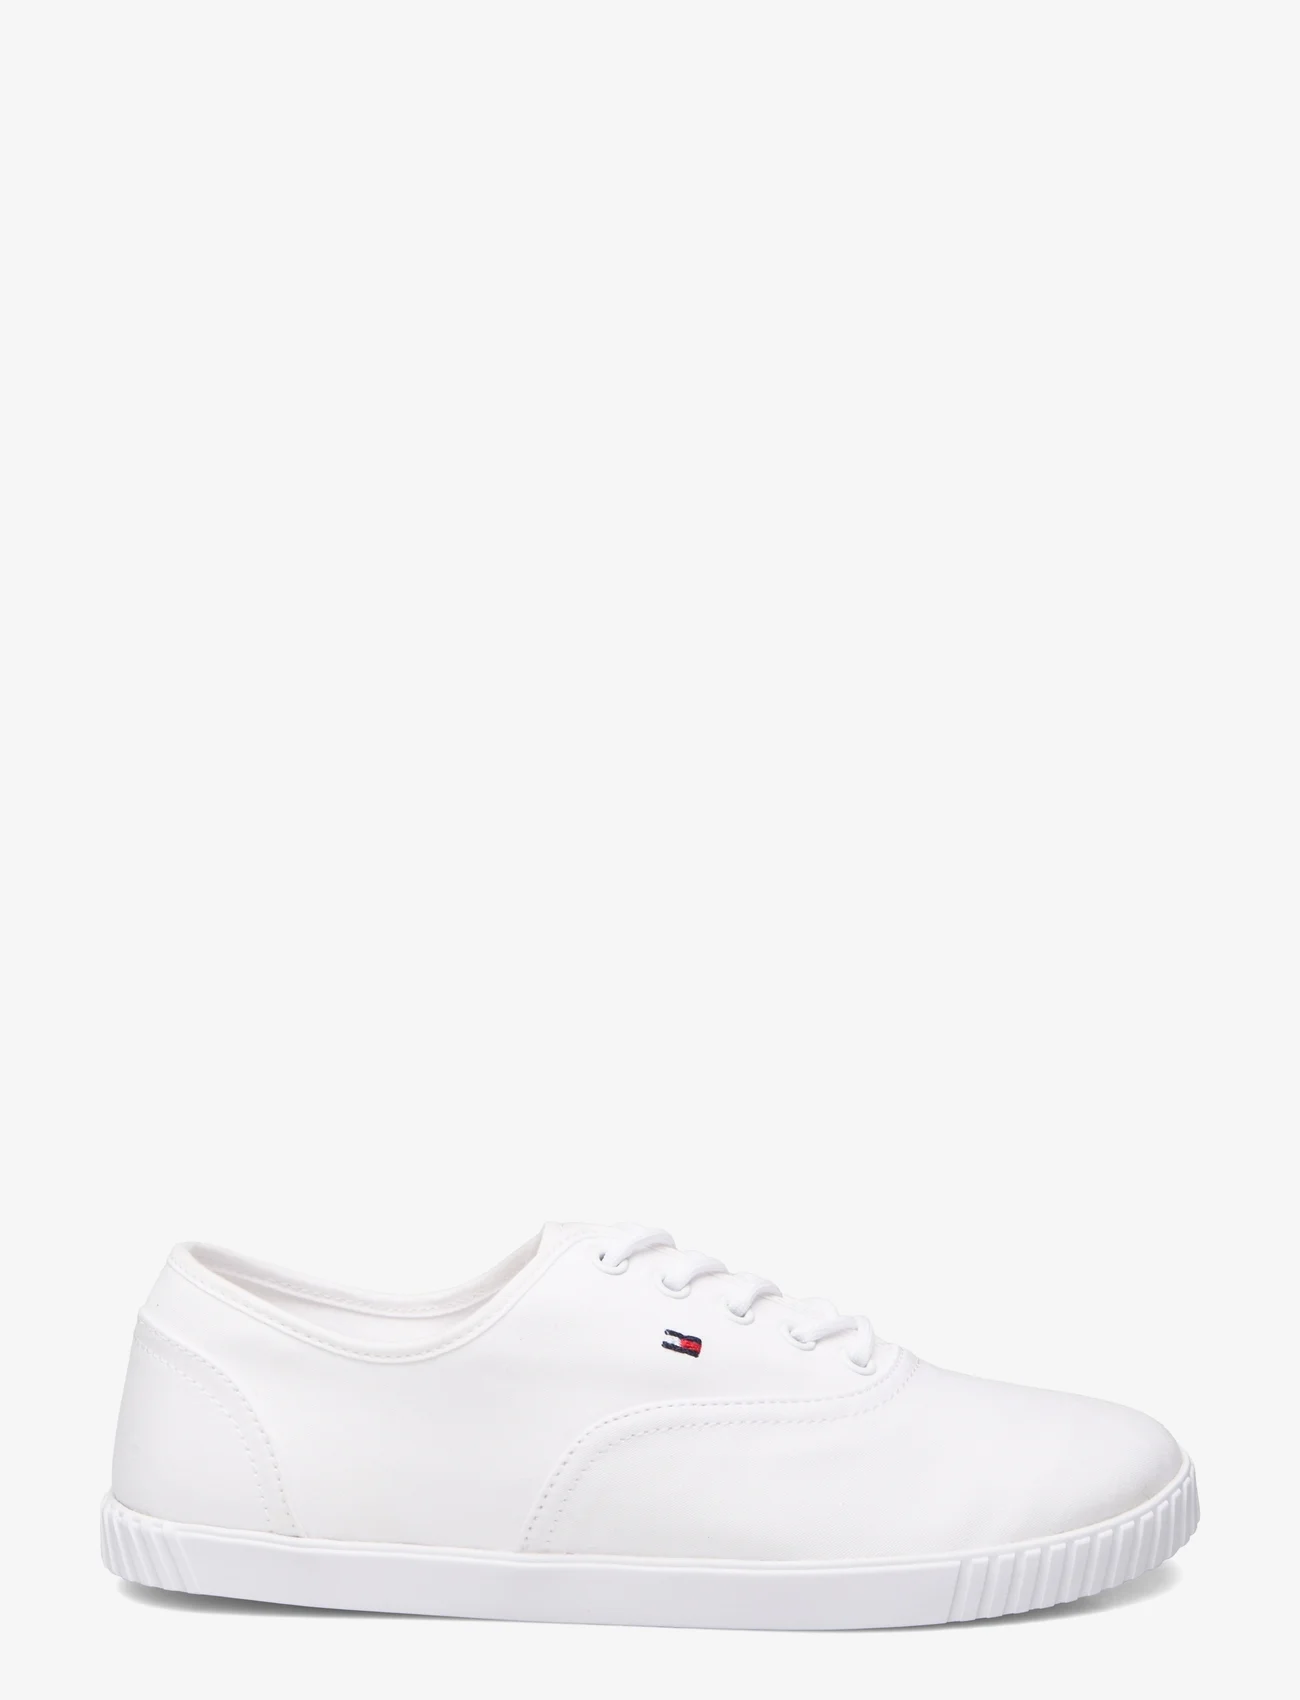 Tommy Hilfiger - CANVAS LACE UP SNEAKER - sneakers - white - 1